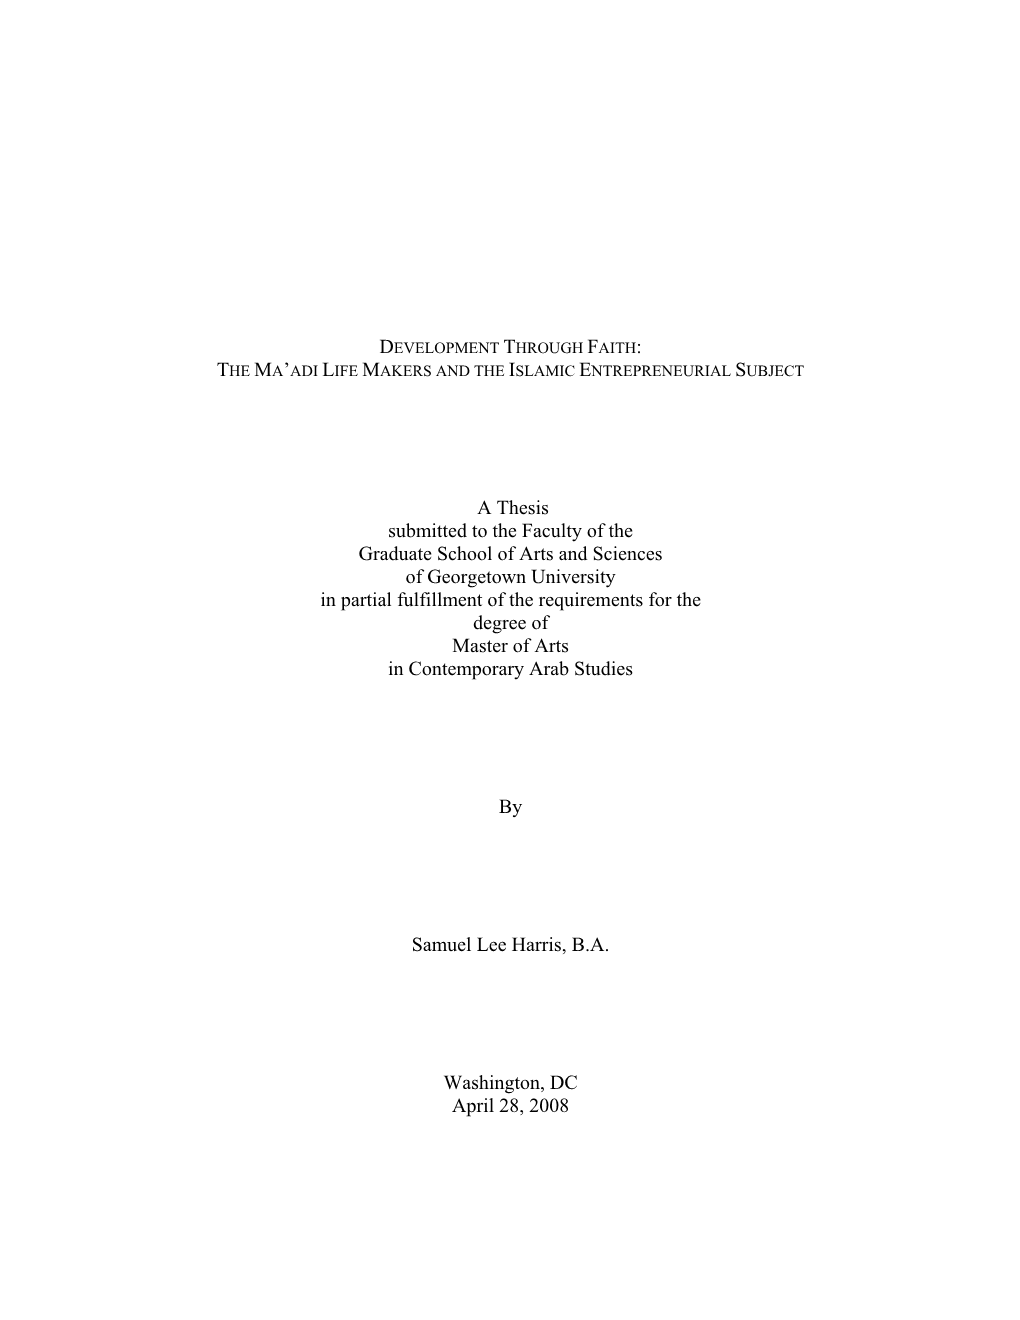 A Thesis Submitted to the Faculty of the Graduate School of Arts and Sciences of Georgetown University in Partial Fulfillment Of